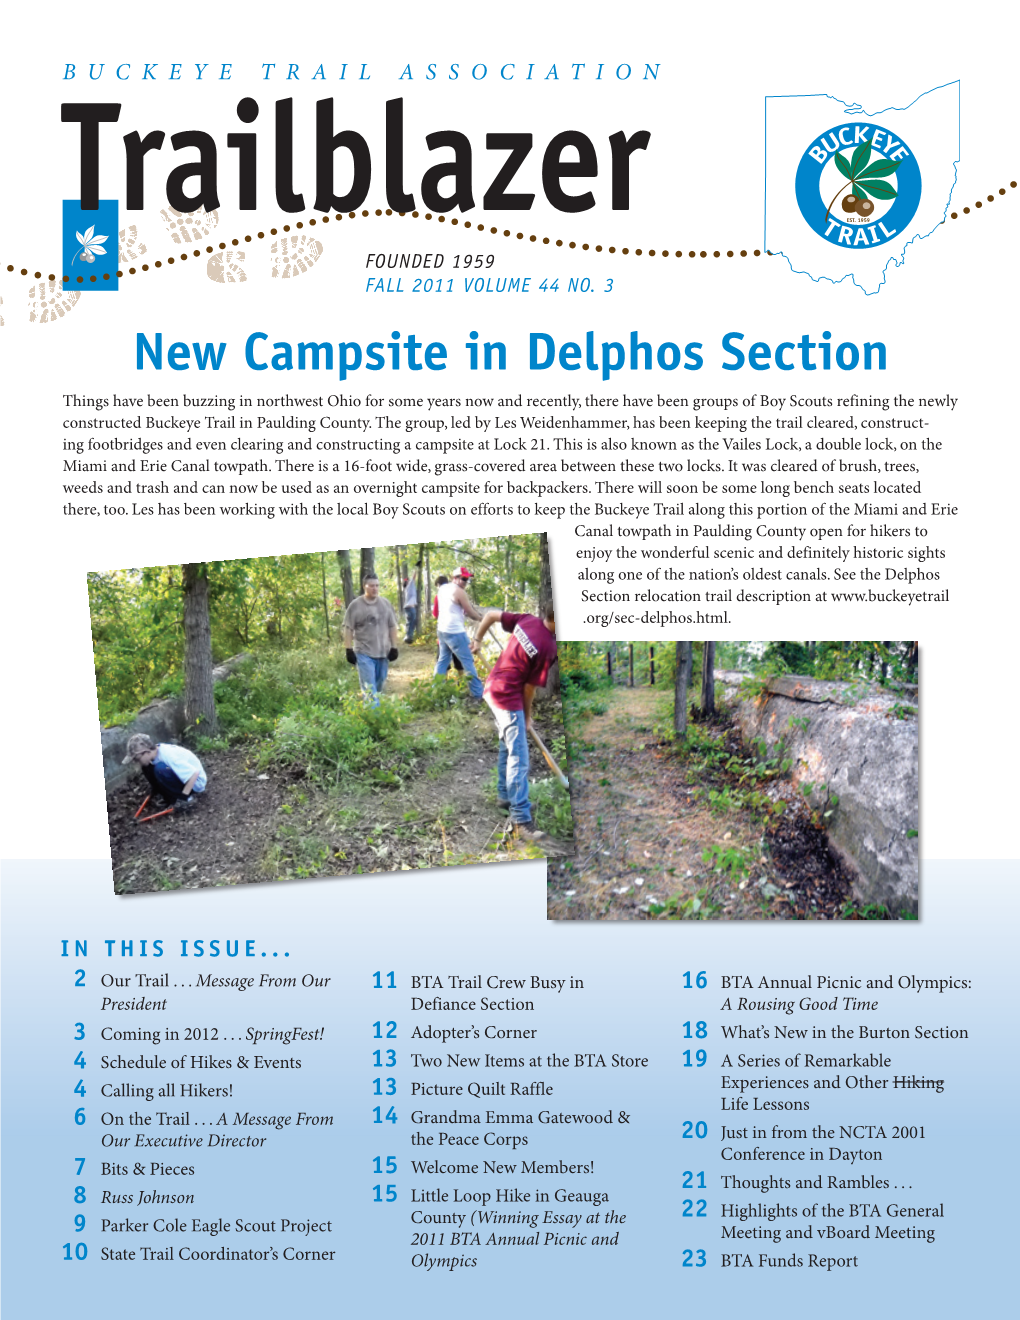 New Campsite in Delphos Section